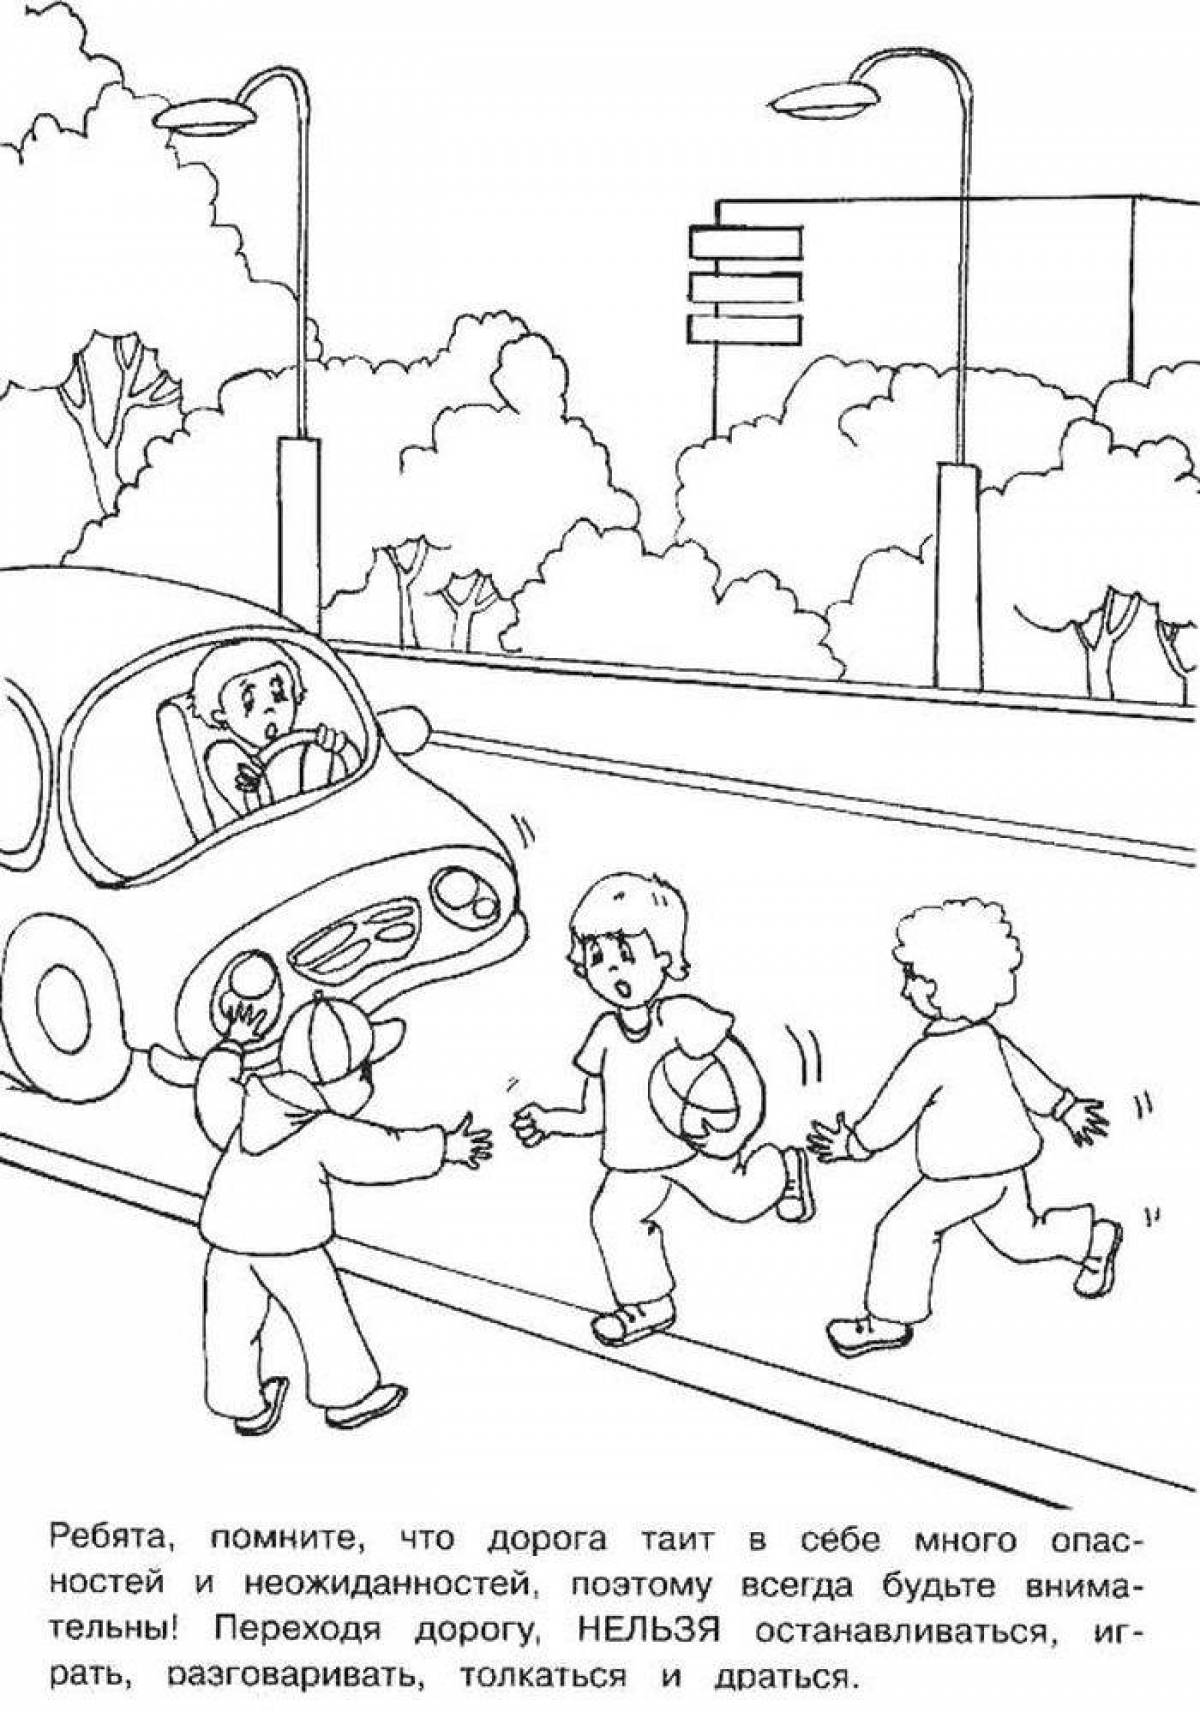 Creative traffic rules coloring book for preschoolers